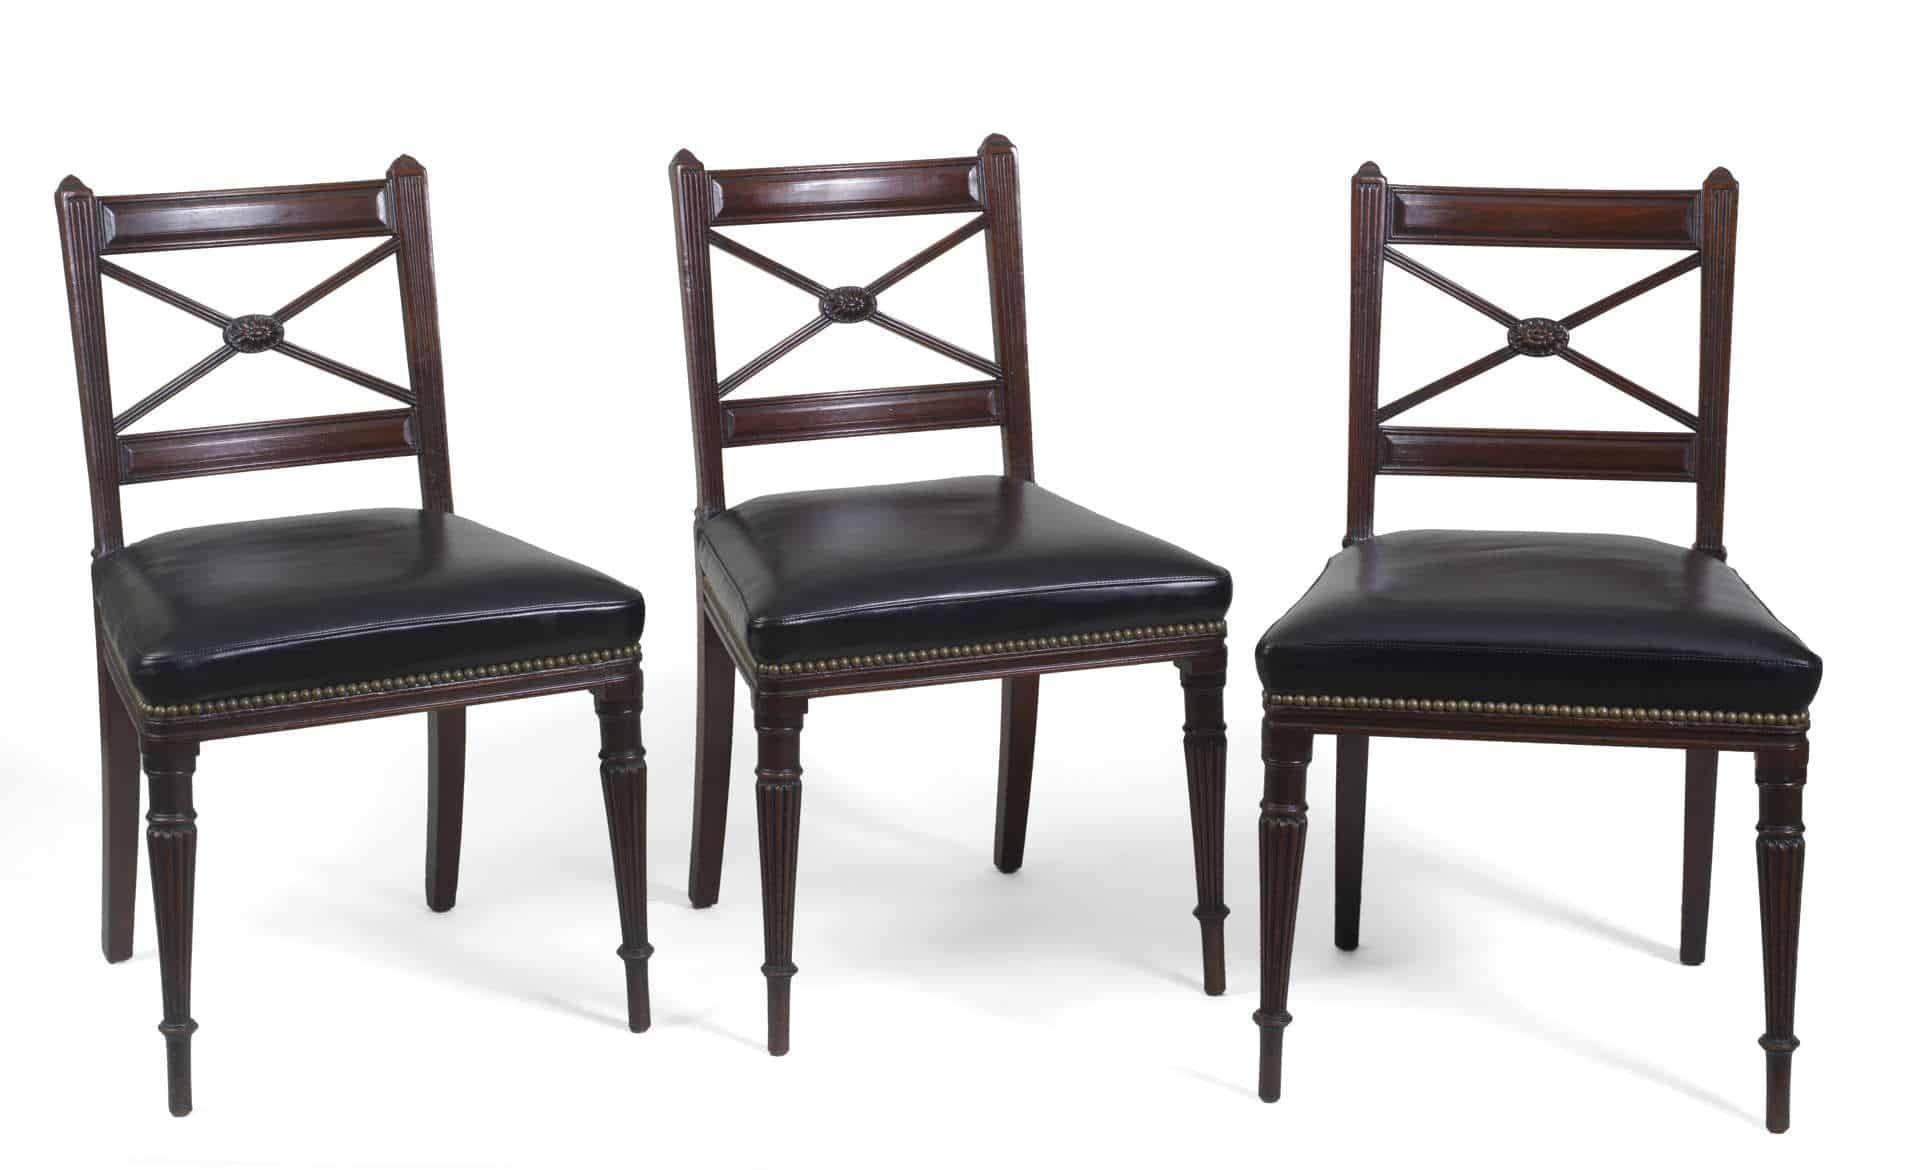 Set of four (4) 19th century English carved mahogany side chairs; straight crest rail above an X-form and oval flowerhead patera splat, black leather seat and nailhead trim raised on frontal turned and tapered reeded legs.